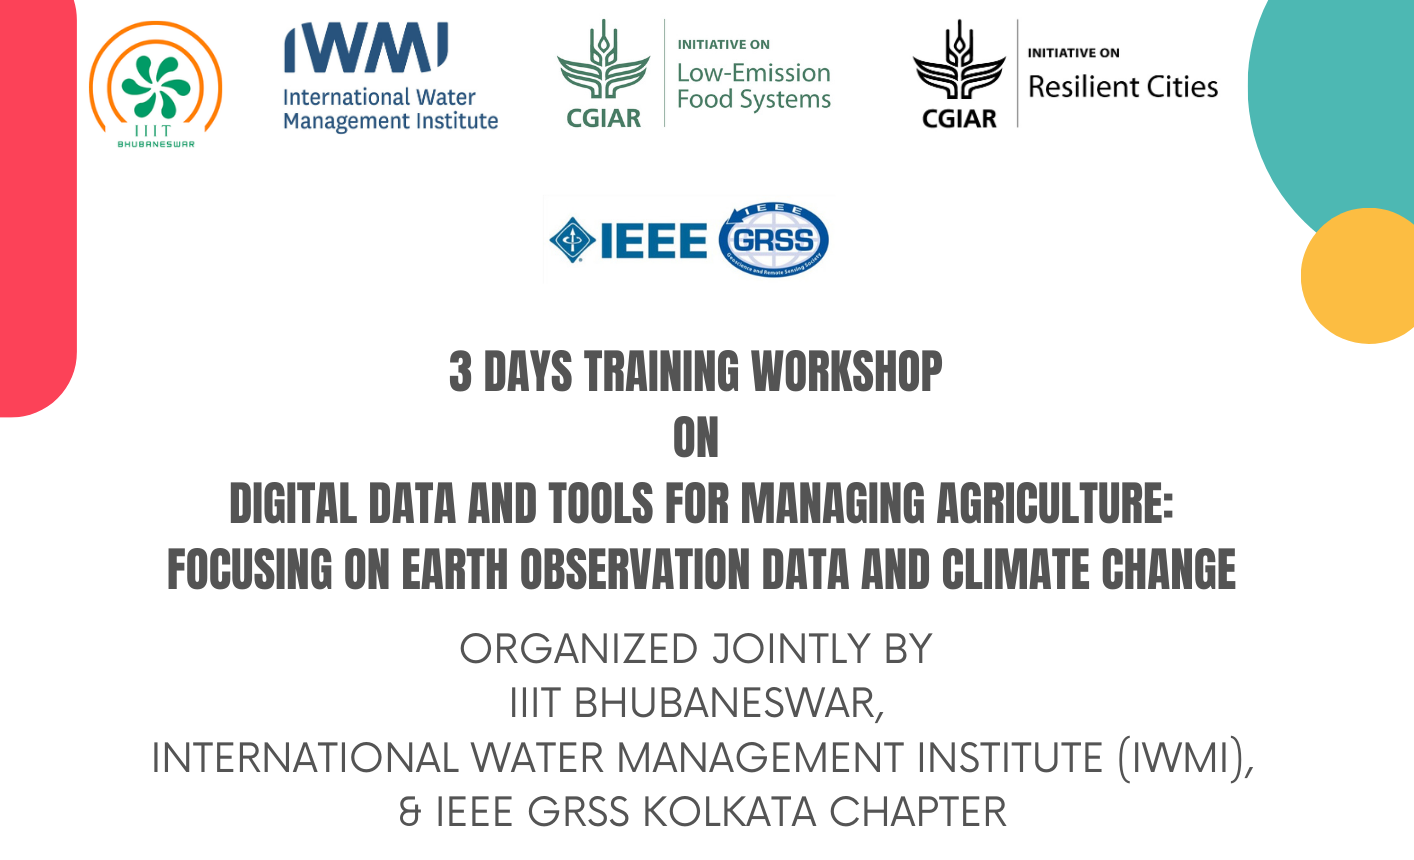 Digital data and tools for managing agriculture: Focusing on earth observation data and climate change